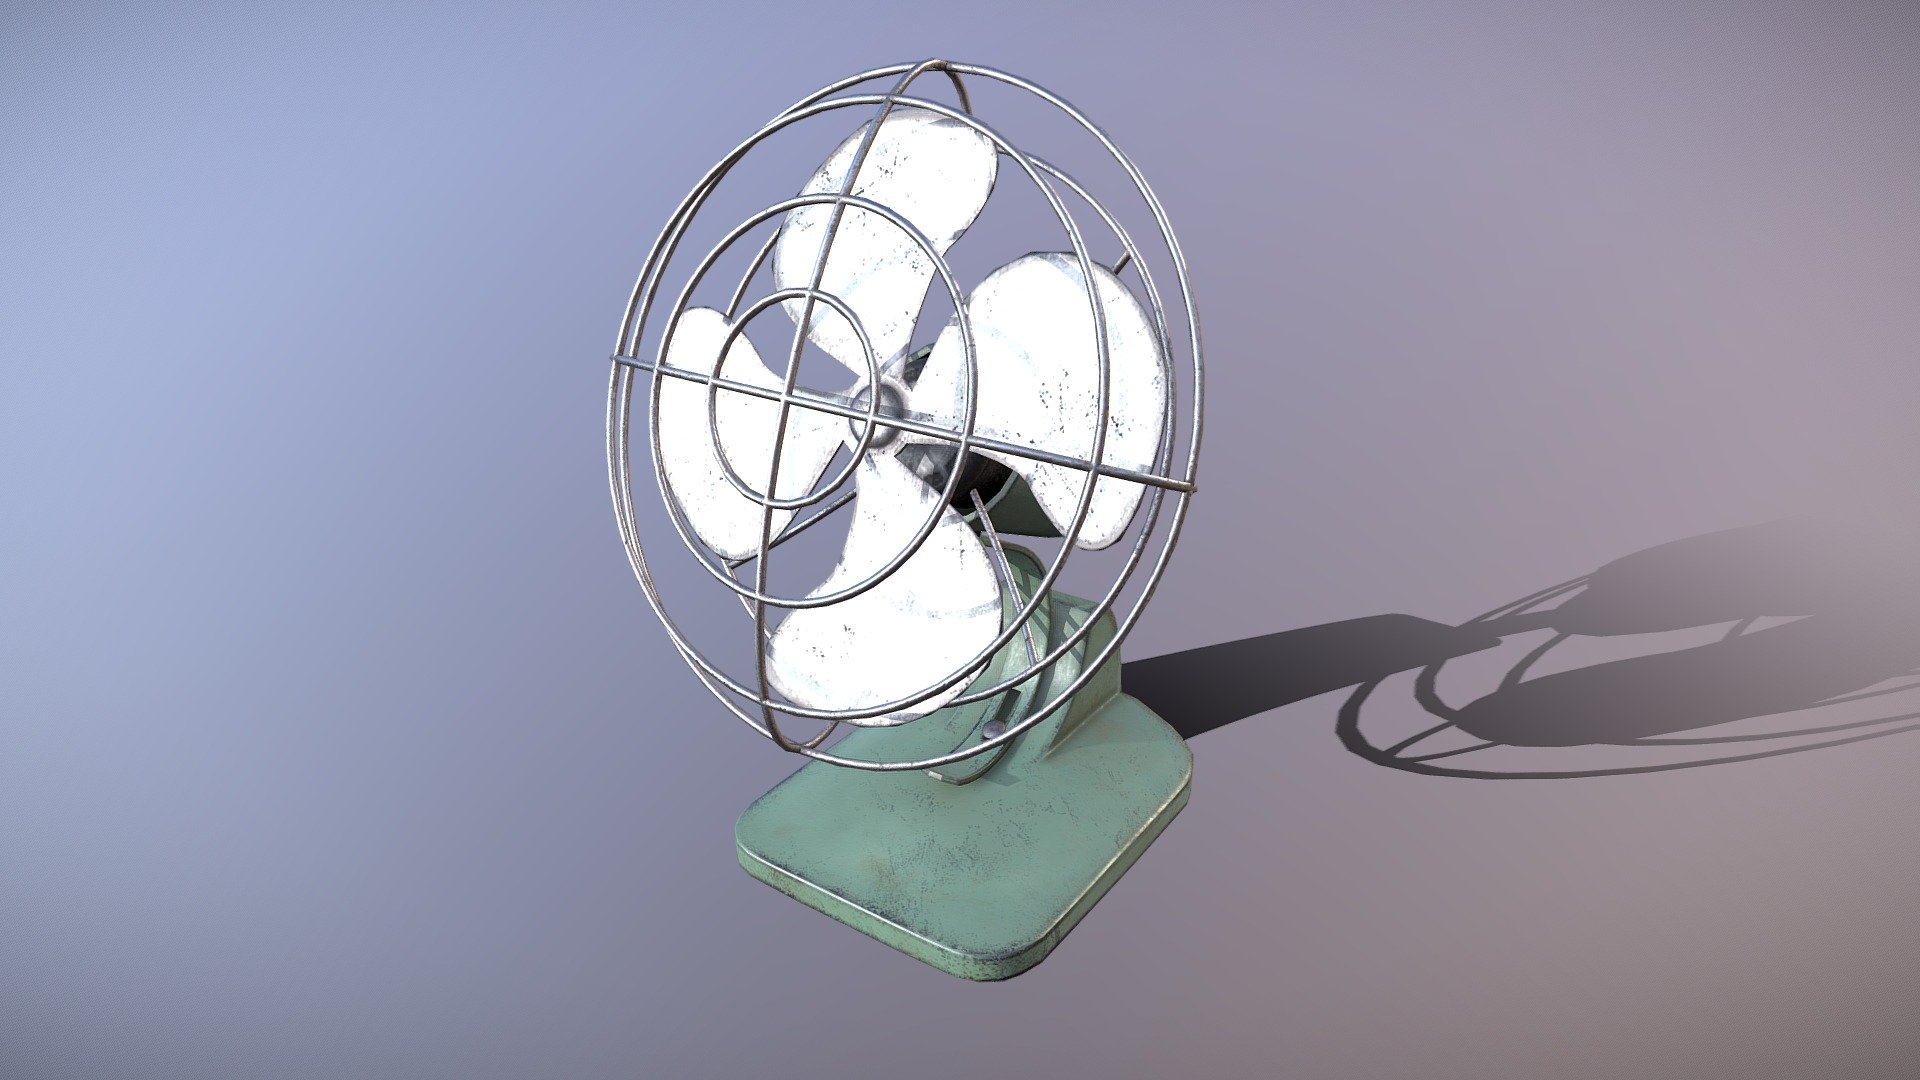 Vintage Fan designed for PBR engines.

Ready for animation. The blades are a separate object with the pivot point set at the appropriate position for blade rotation.

Originally modeled in 3ds Max 2019. Download includes .max, .fbx, .obj, metal/roughness PBR textures, textures for Unity and Unreal Engines, and additional texture maps such as curvature, AO, and color ID.

Specs




Scaled to approximate real world size (centimeters)

Mesh is in tris and quads, no n-gons.

Textures

1 Material: 1024x1024 Base Color, Roughness, Metallic, Normal, AO

Unity Engine 5 Textures: AlbedoTransparency, MetallicSmoothness, Normal, Occlusion

Unreal Engine 4 Textures: BaseColor, Normal, RoughnessMetallicAO - Vintage Fan - Buy Royalty Free 3D model by Luchador (@Luchador90) 3d model